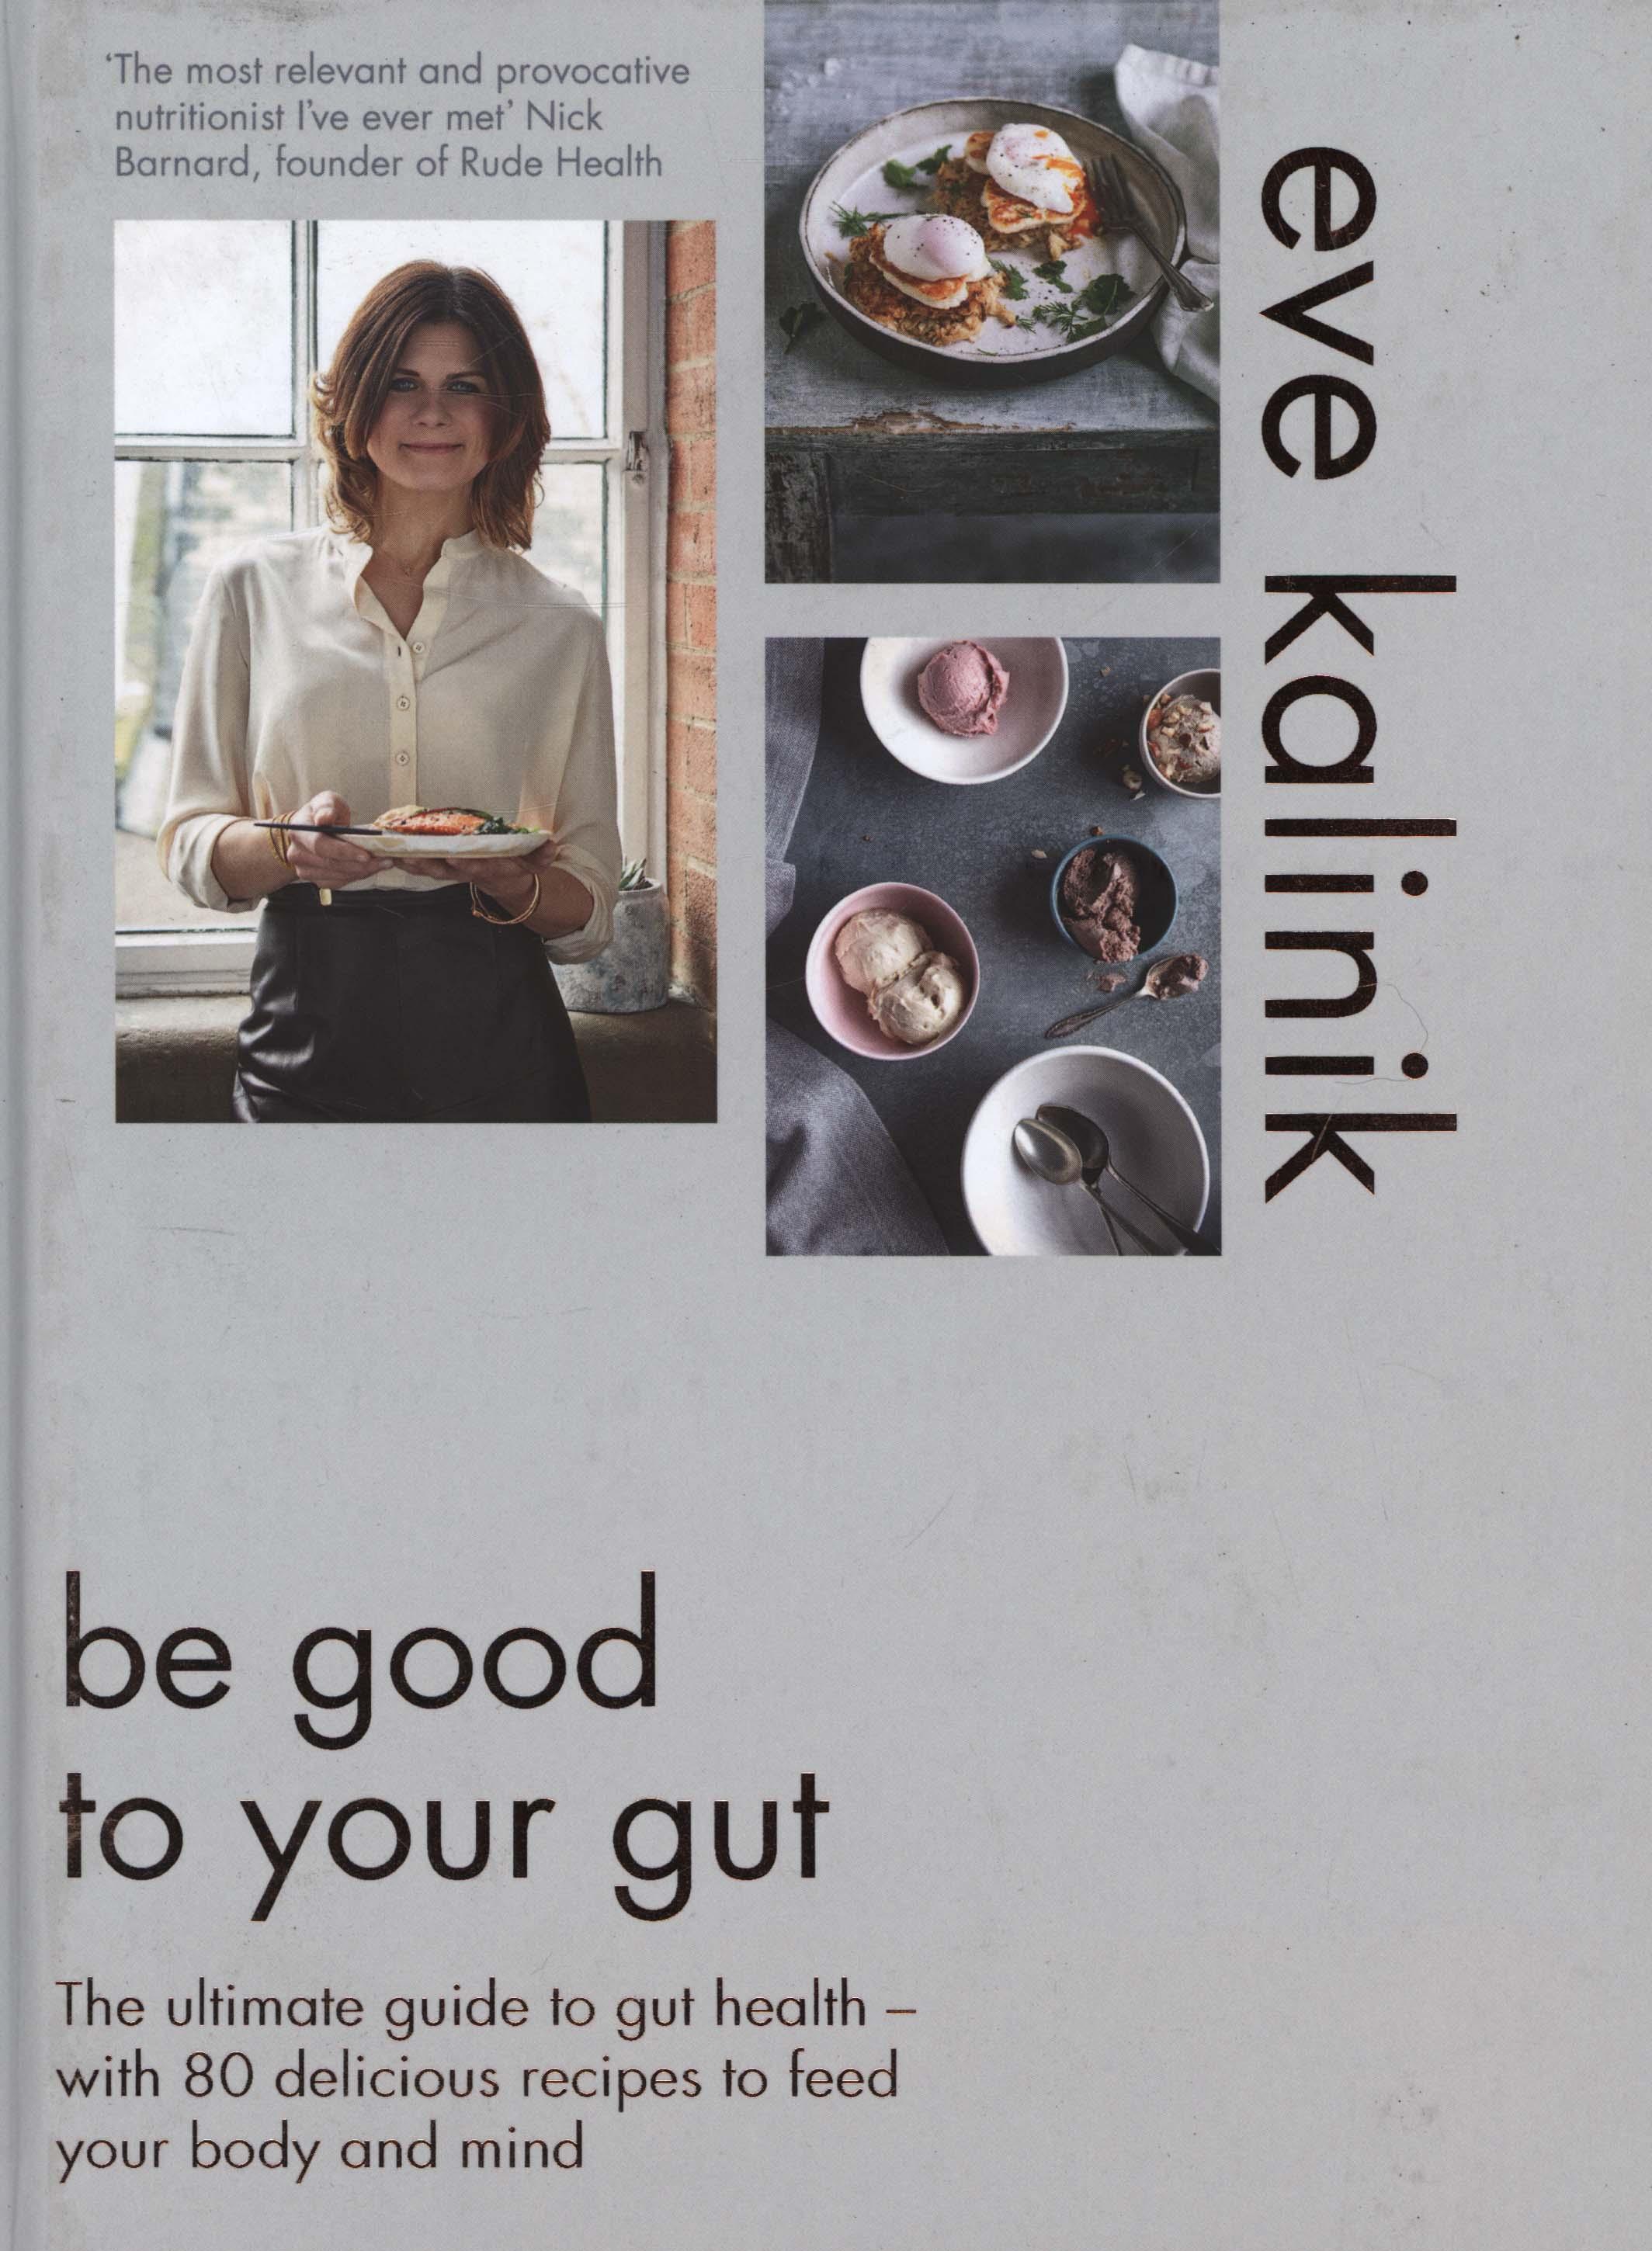 Be Good to Your Gut